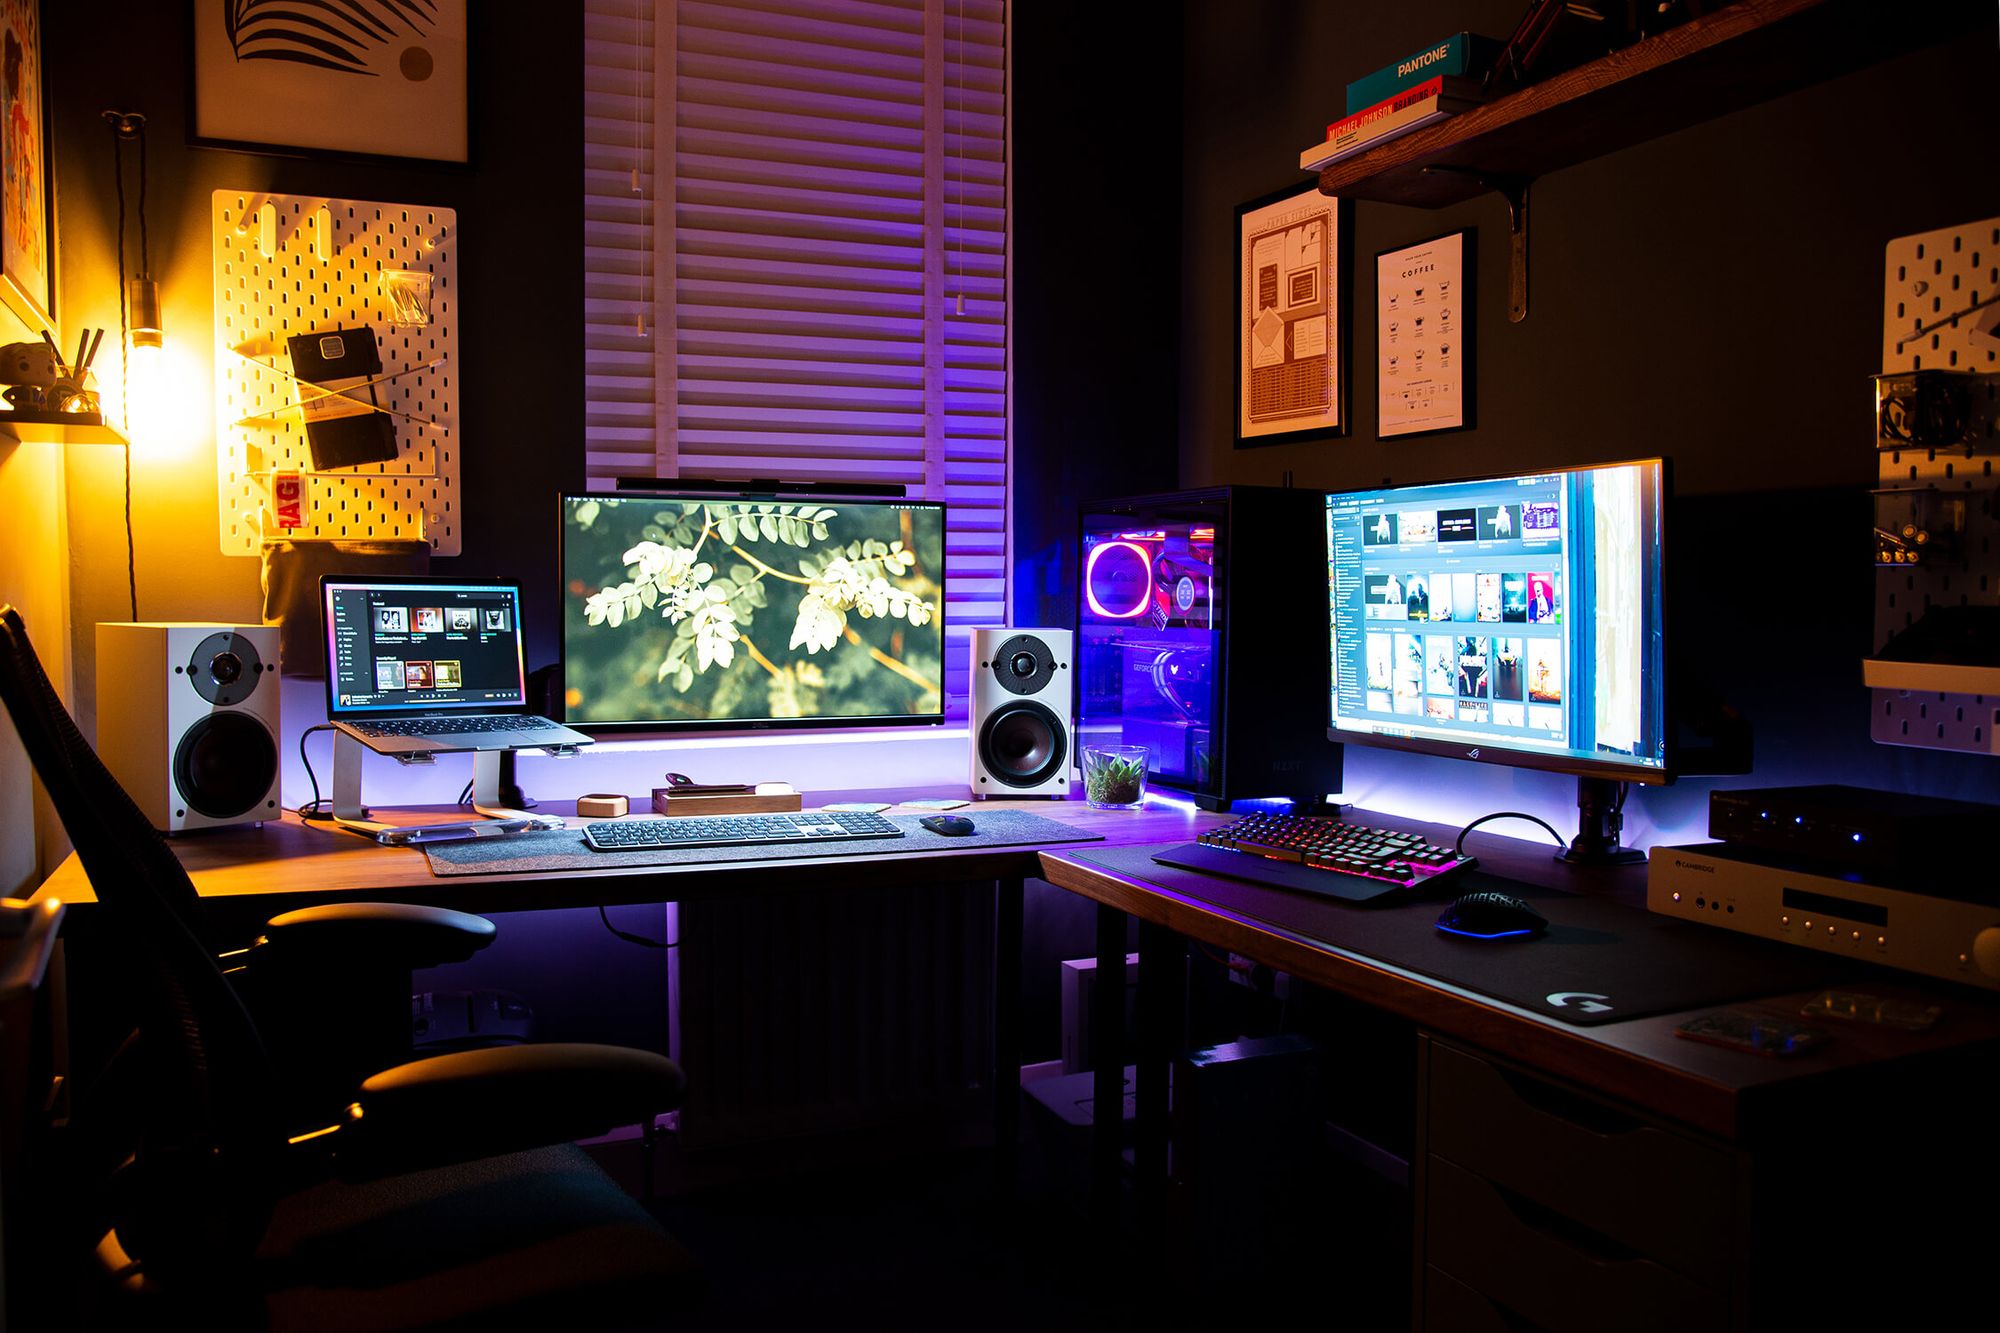 Having different lighting for each workspace helps to amplify the separation between the gaming and WFH setup